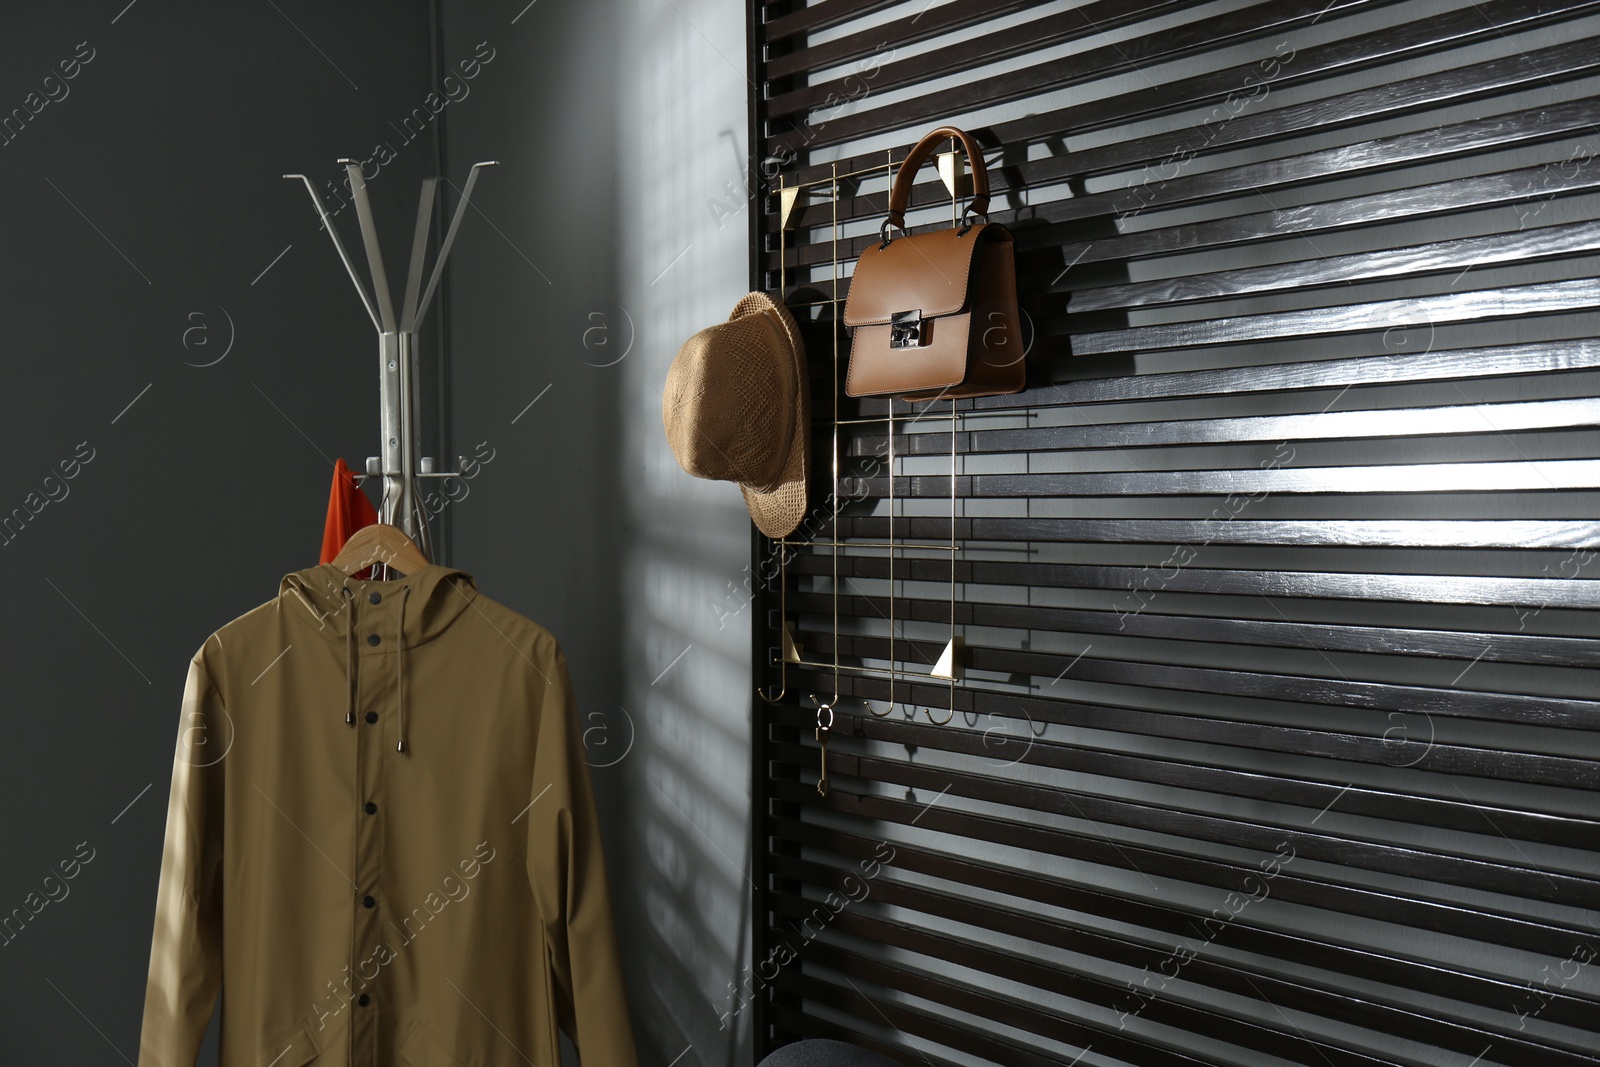 Photo of Rack with clothes and accessories in modern hallway